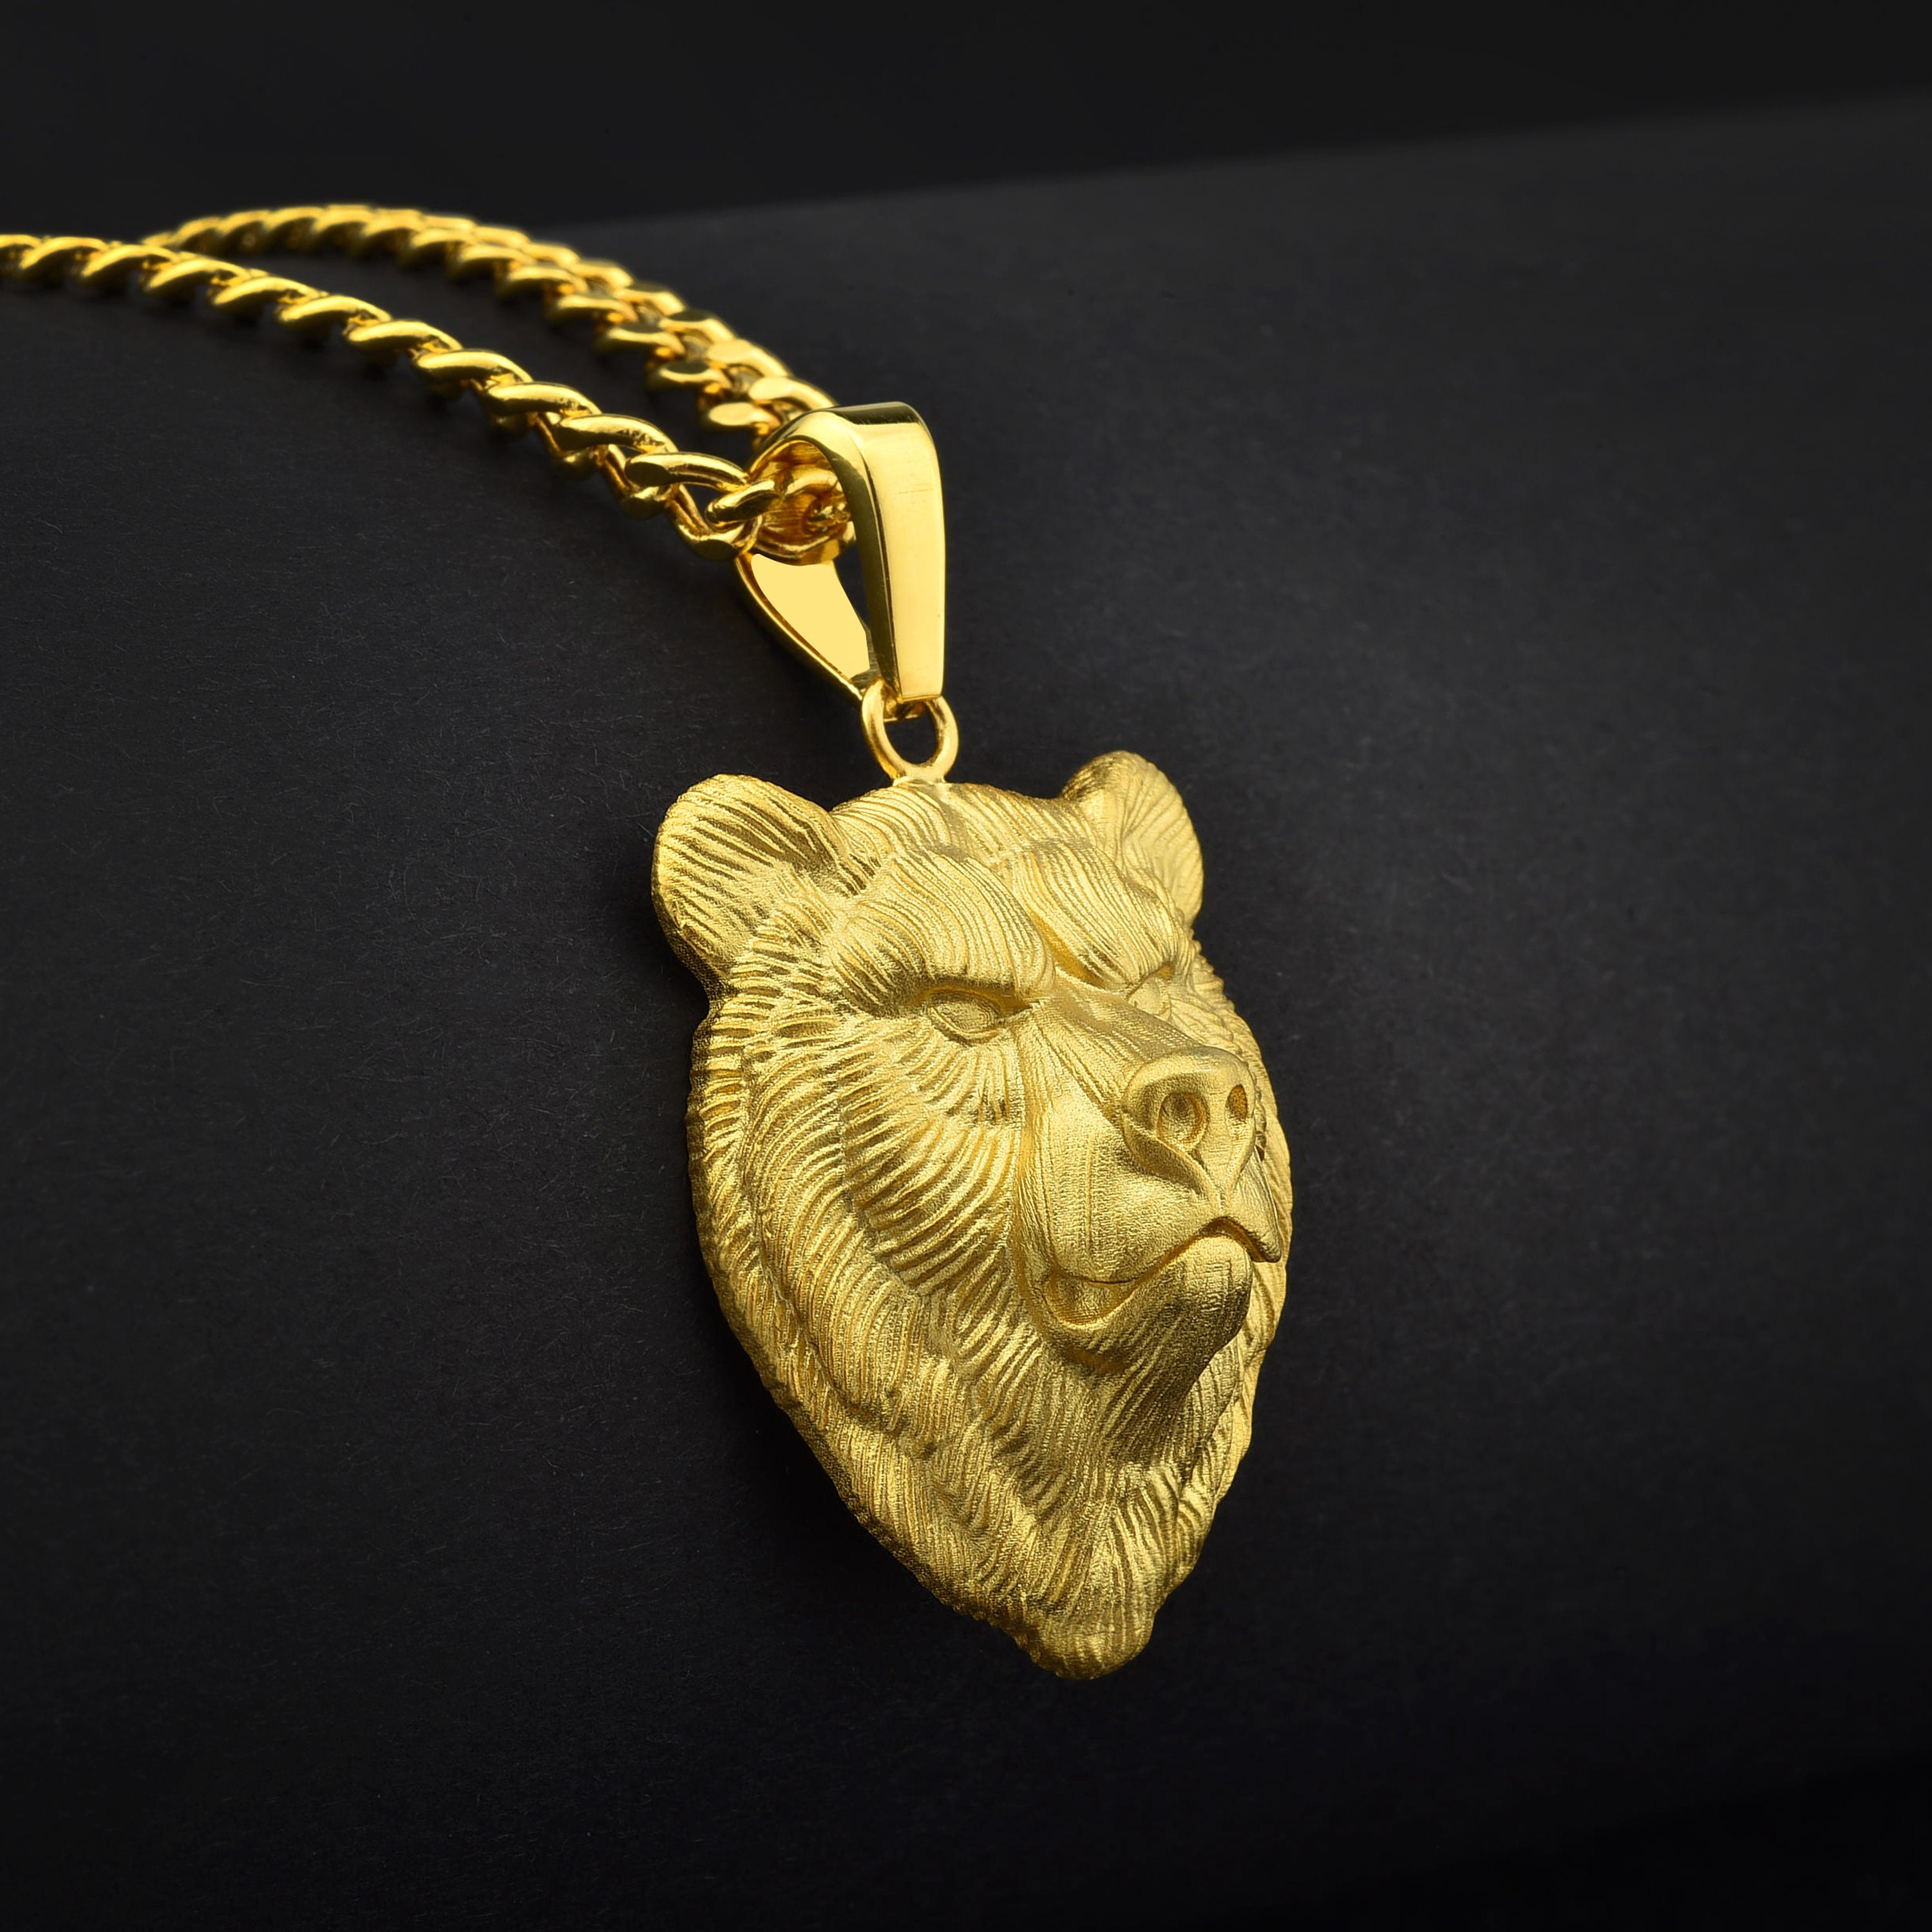 Mahi Gold Plated Teddy Bear Pendant with CZ for Women PS1101466G :  Amazon.in: Jewellery